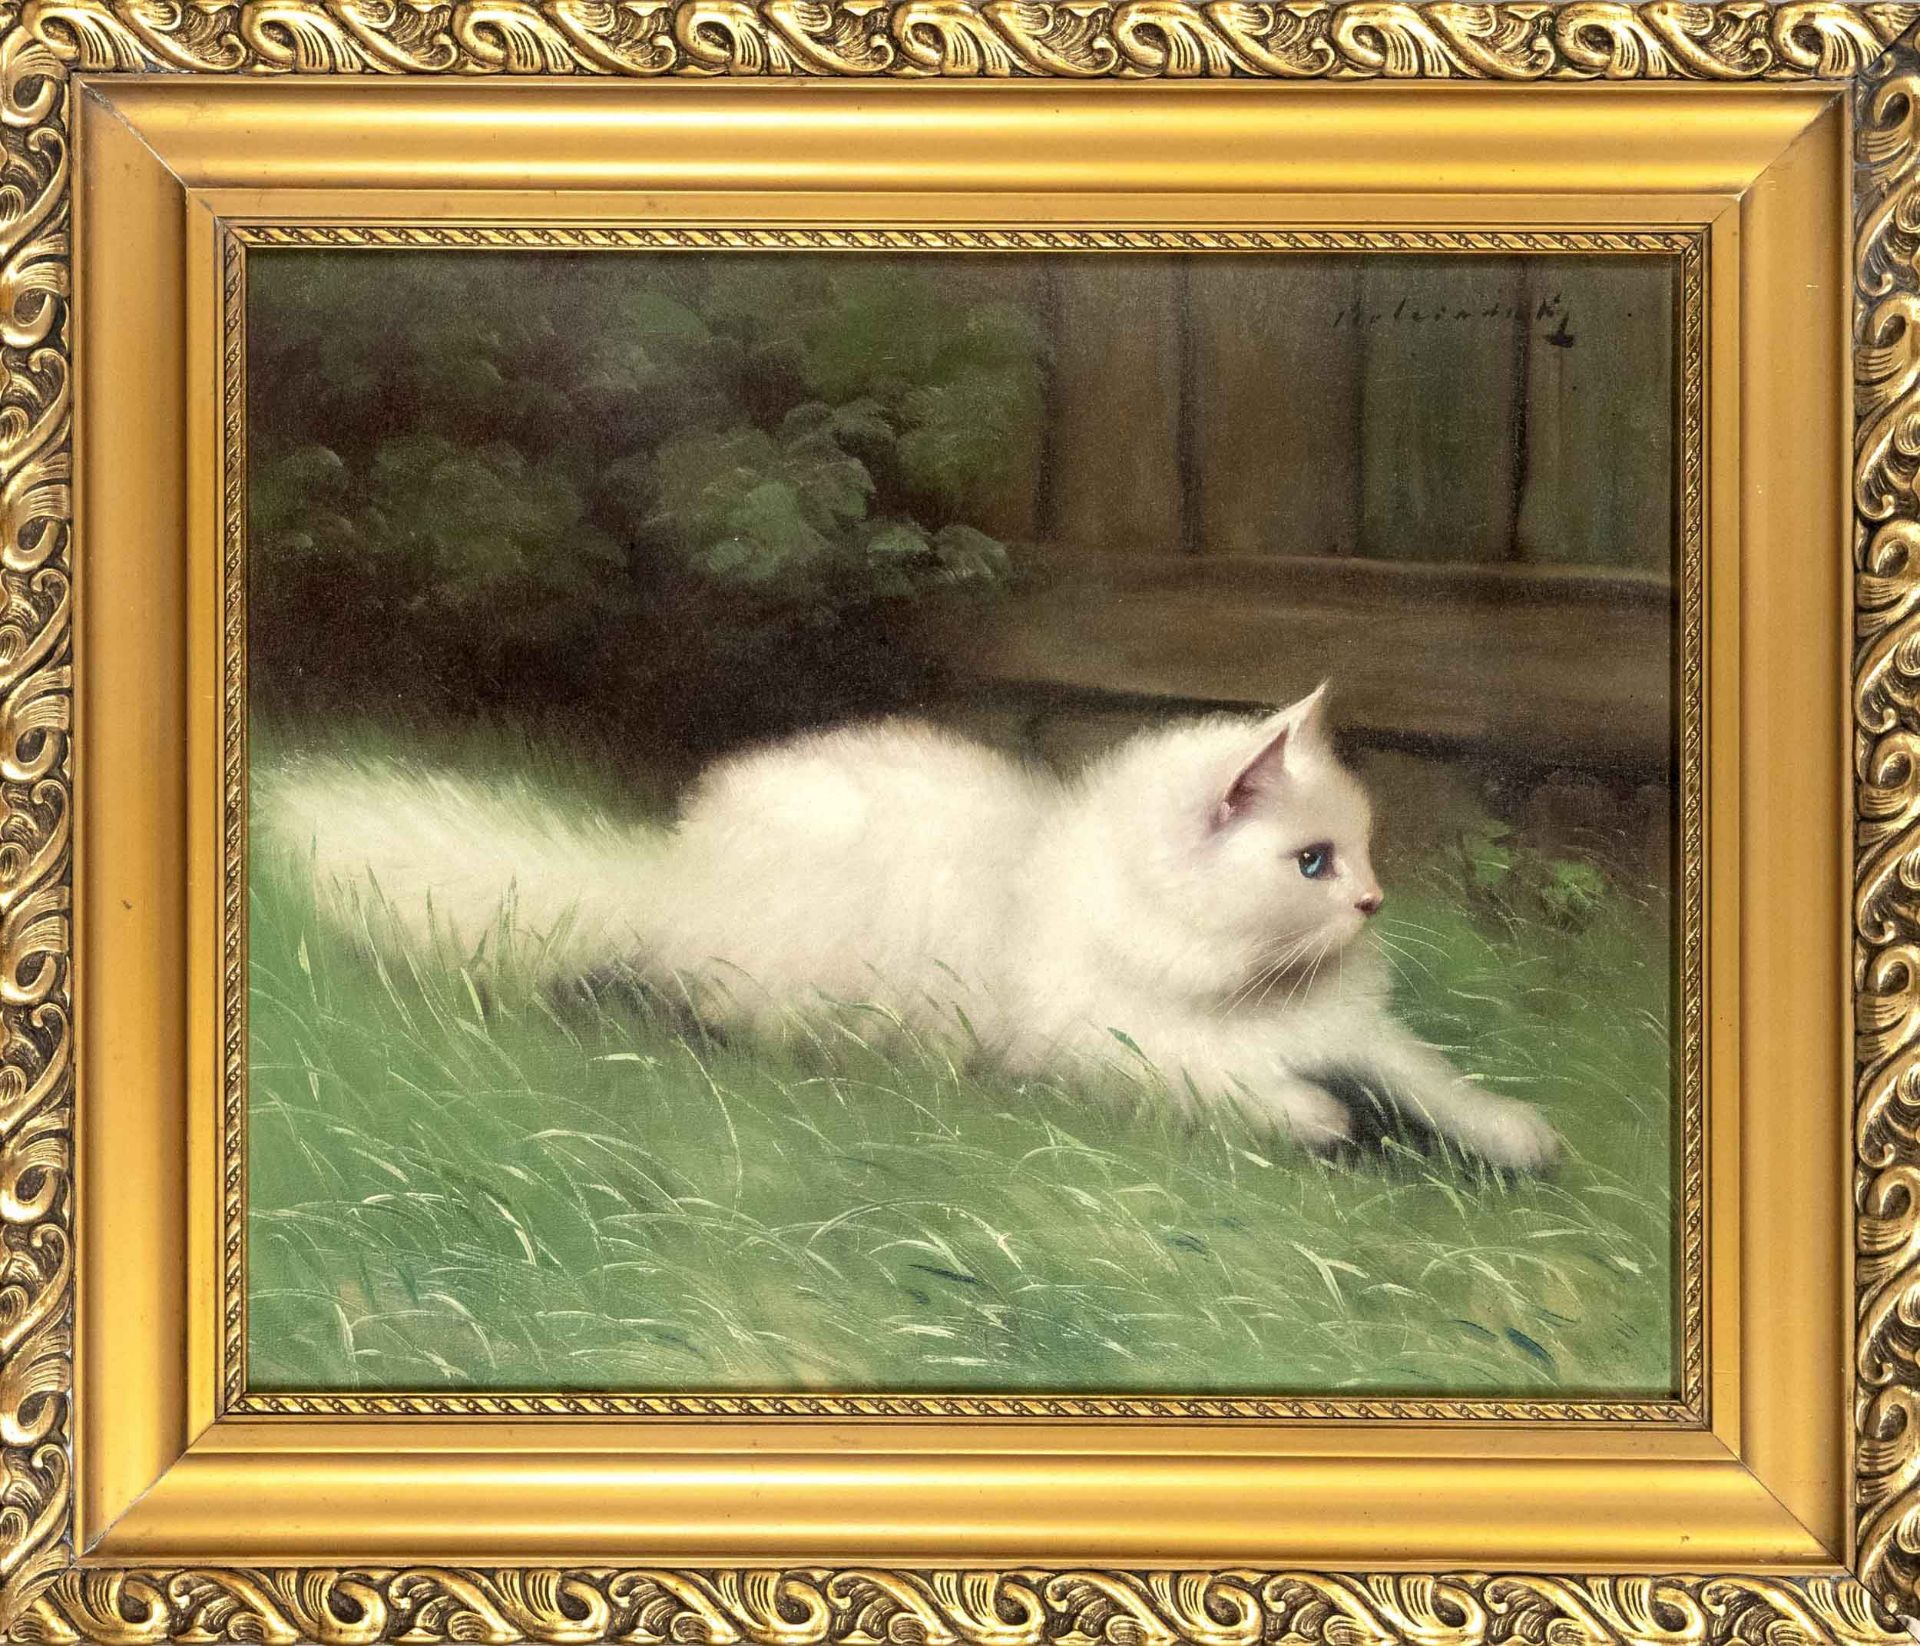 Unidentified, probably Eastern European painter 1st half of 20th century, white cat lying in the